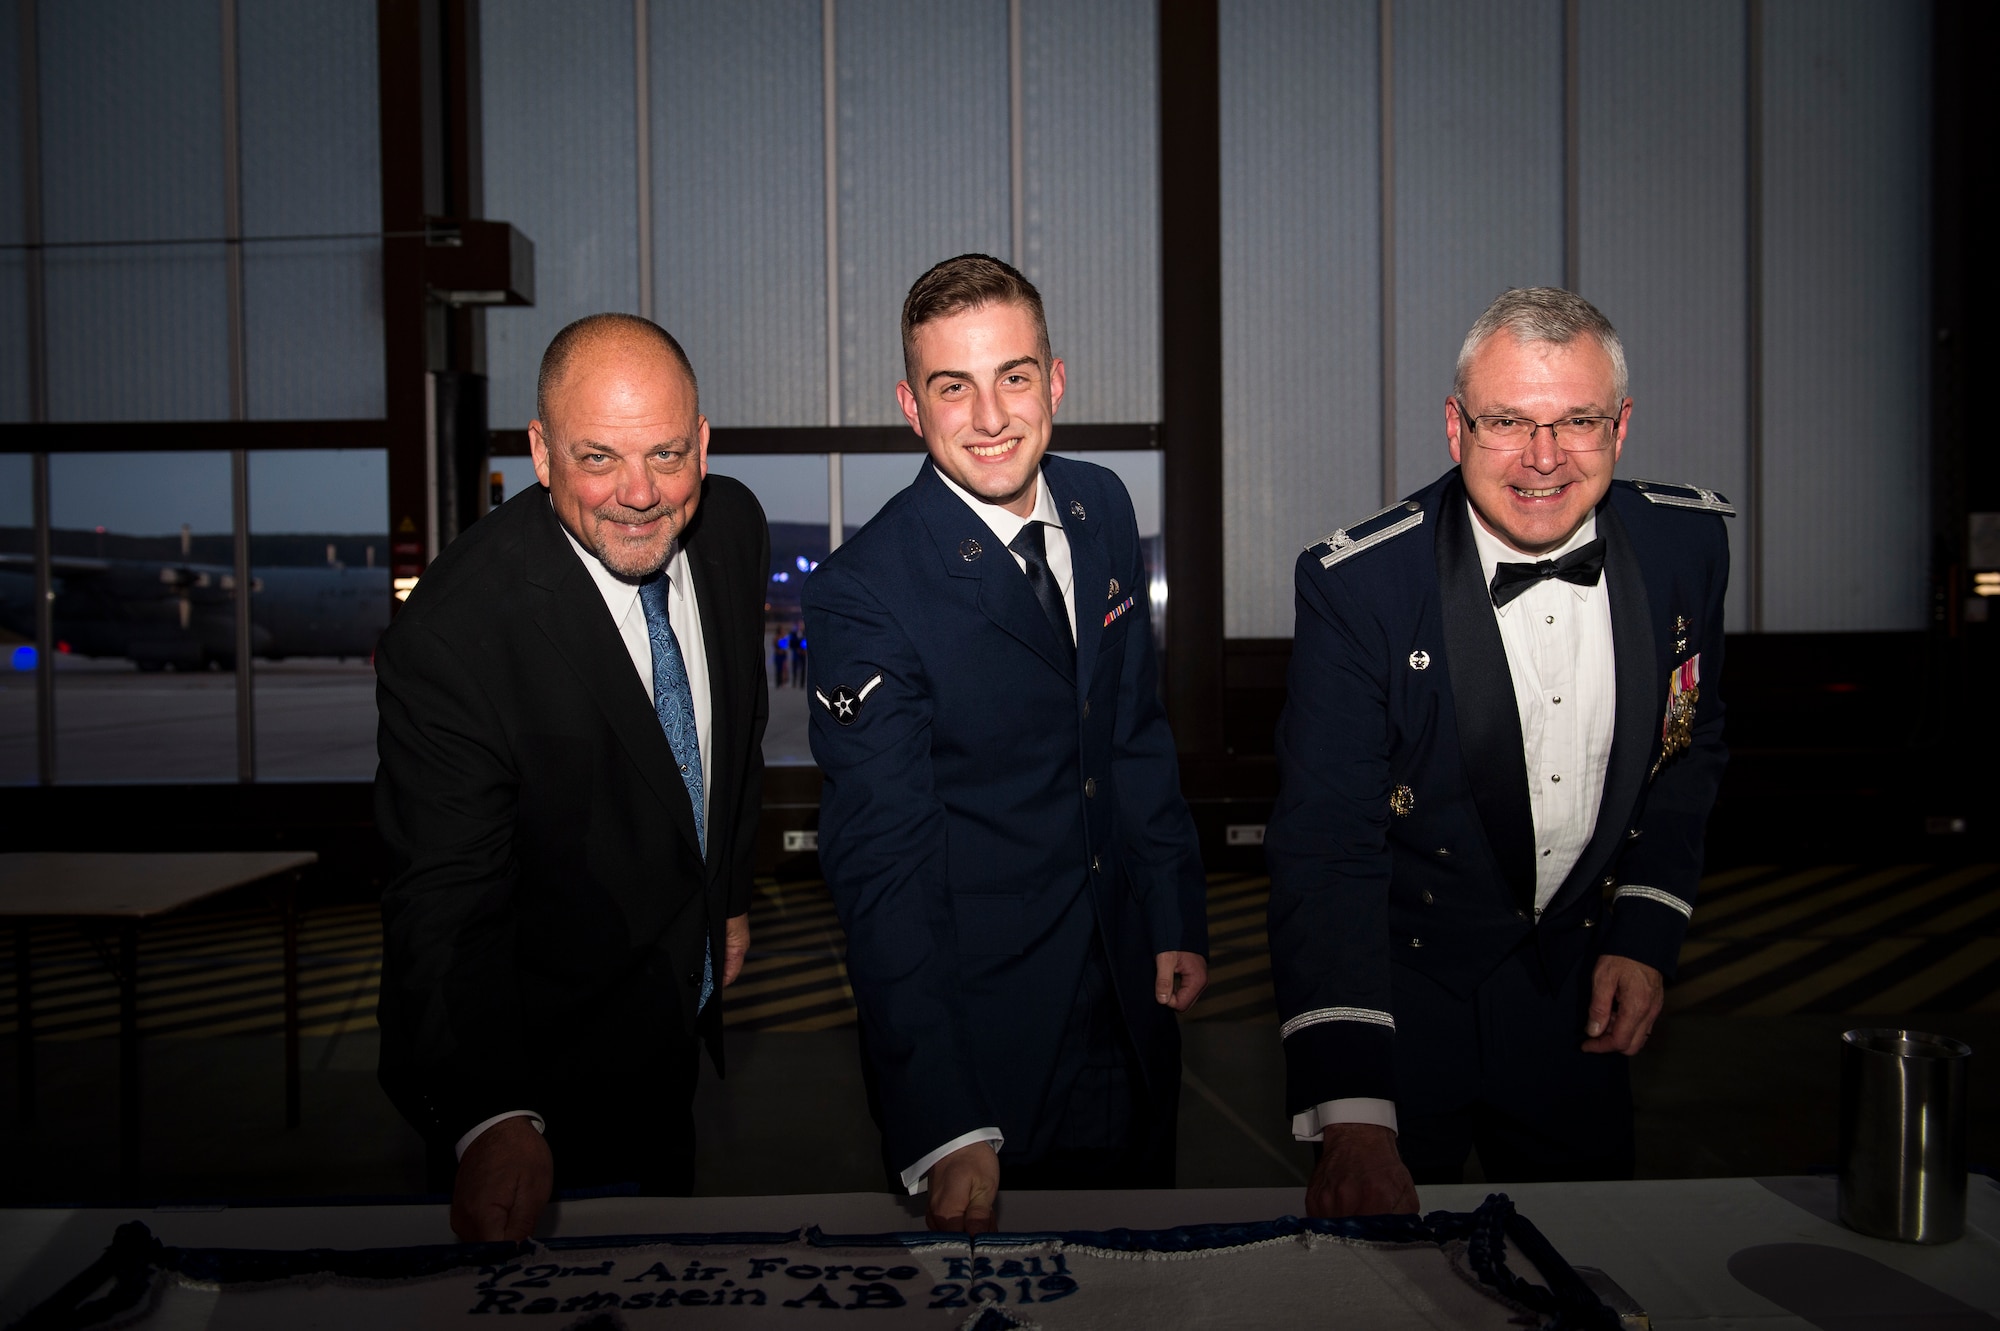 Scott C. Lockard, 86th Airlift Wing vice director (left), U.S. Air Force Airman Zackary Treadwell, 86th Maintenance Group (middle), and Col. Robert S. Thompson, 86th Mission Support Group commander (right), cut the birthday cake during the 72nd Air Force birthday ball at Ramstein Air Base, Germany, Sept. 21, 2019. The three people cutting the cake represented different aspects of the Total Force. Lockard represented the civilian force, Treadwell the enlisted force, and Thompson the commissioned force. (U.S. Air Force photo by Staff Sgt. Jonathan Bass)